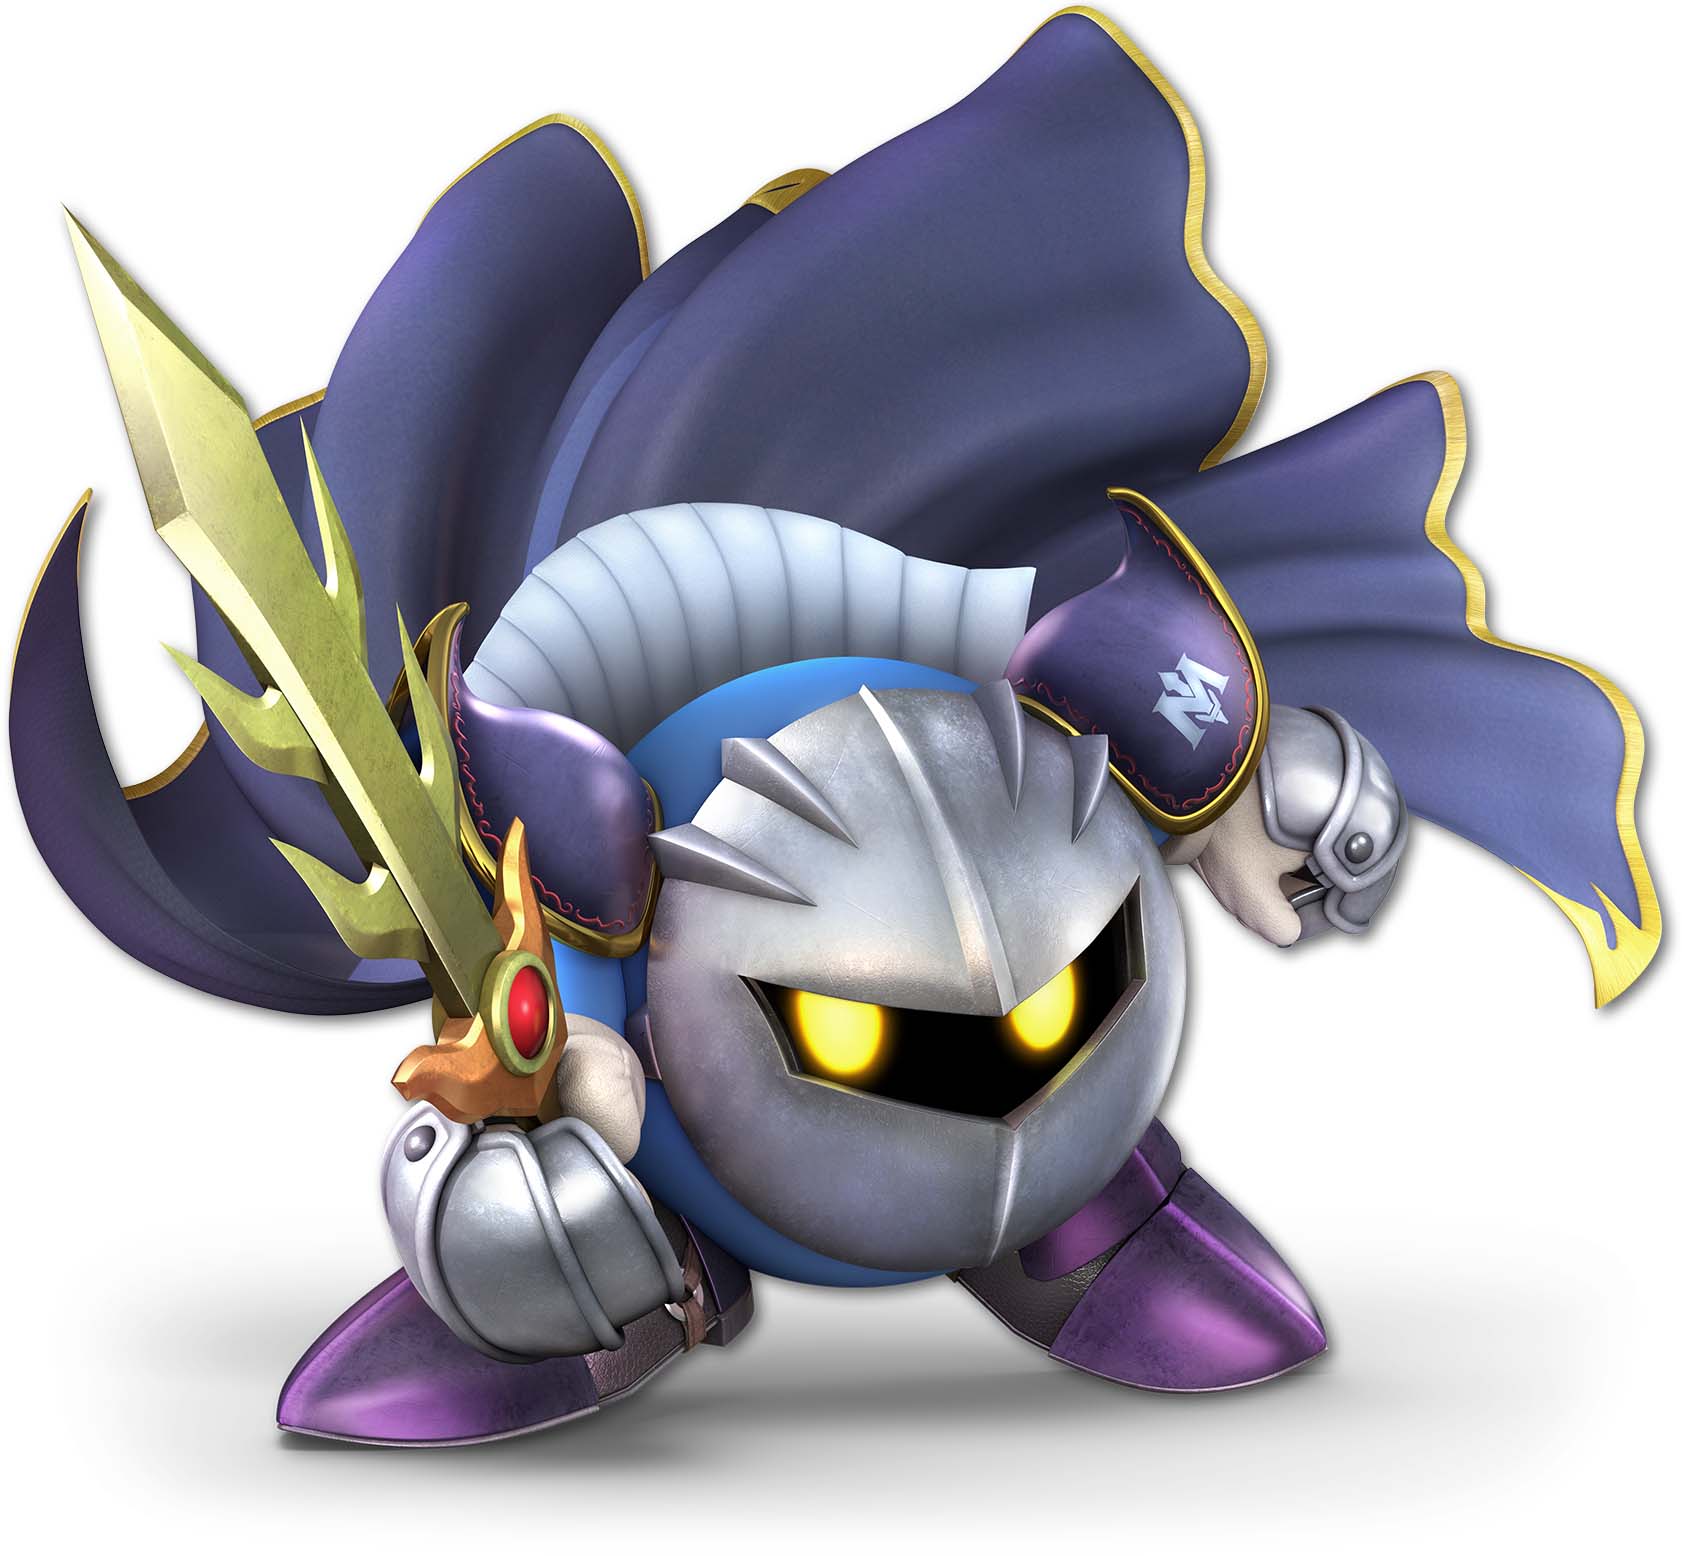 How to counter Meta Knight with Mii Brawler in Super Smash Bros. Ultimate